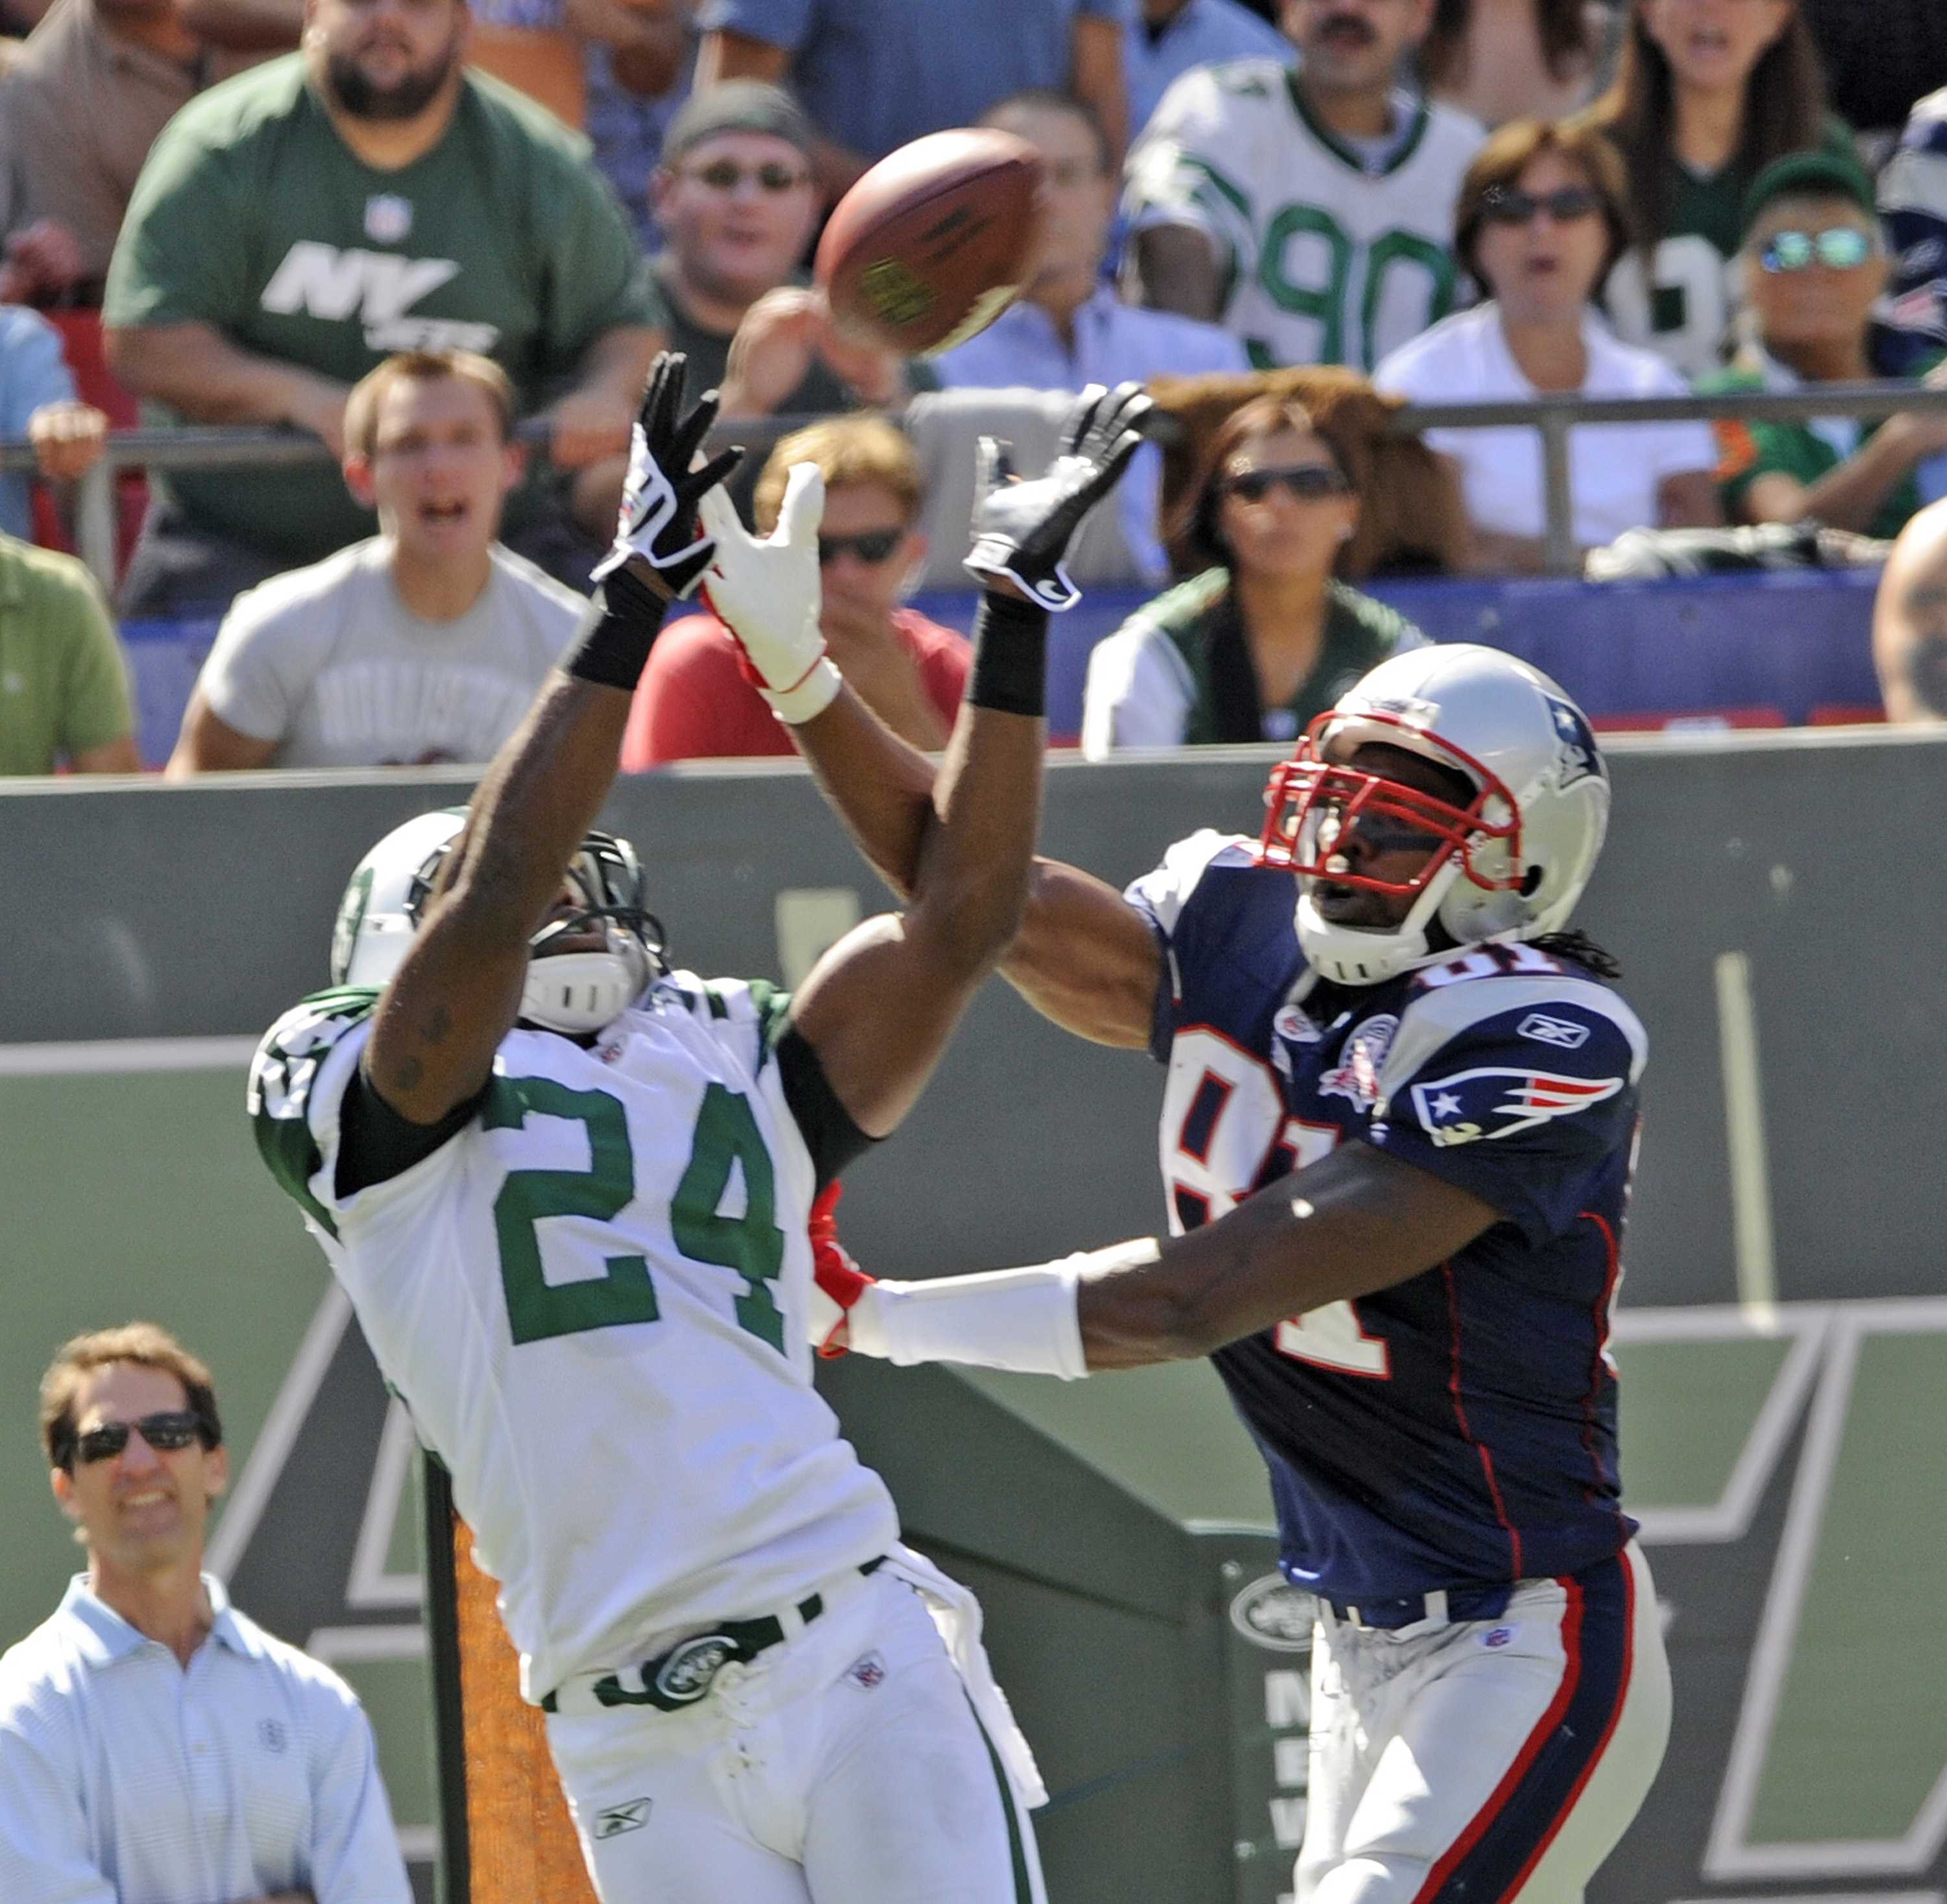 New York Jets Darrelle Revis intercepts a pass intended for New England Patriots Randy Moss in the end zone at Giants Stadium in East Rutherford, New Jersey, Sunday, September 20, 2009. The Jets won 16-9. (David Pokress/Newsday/MCT)